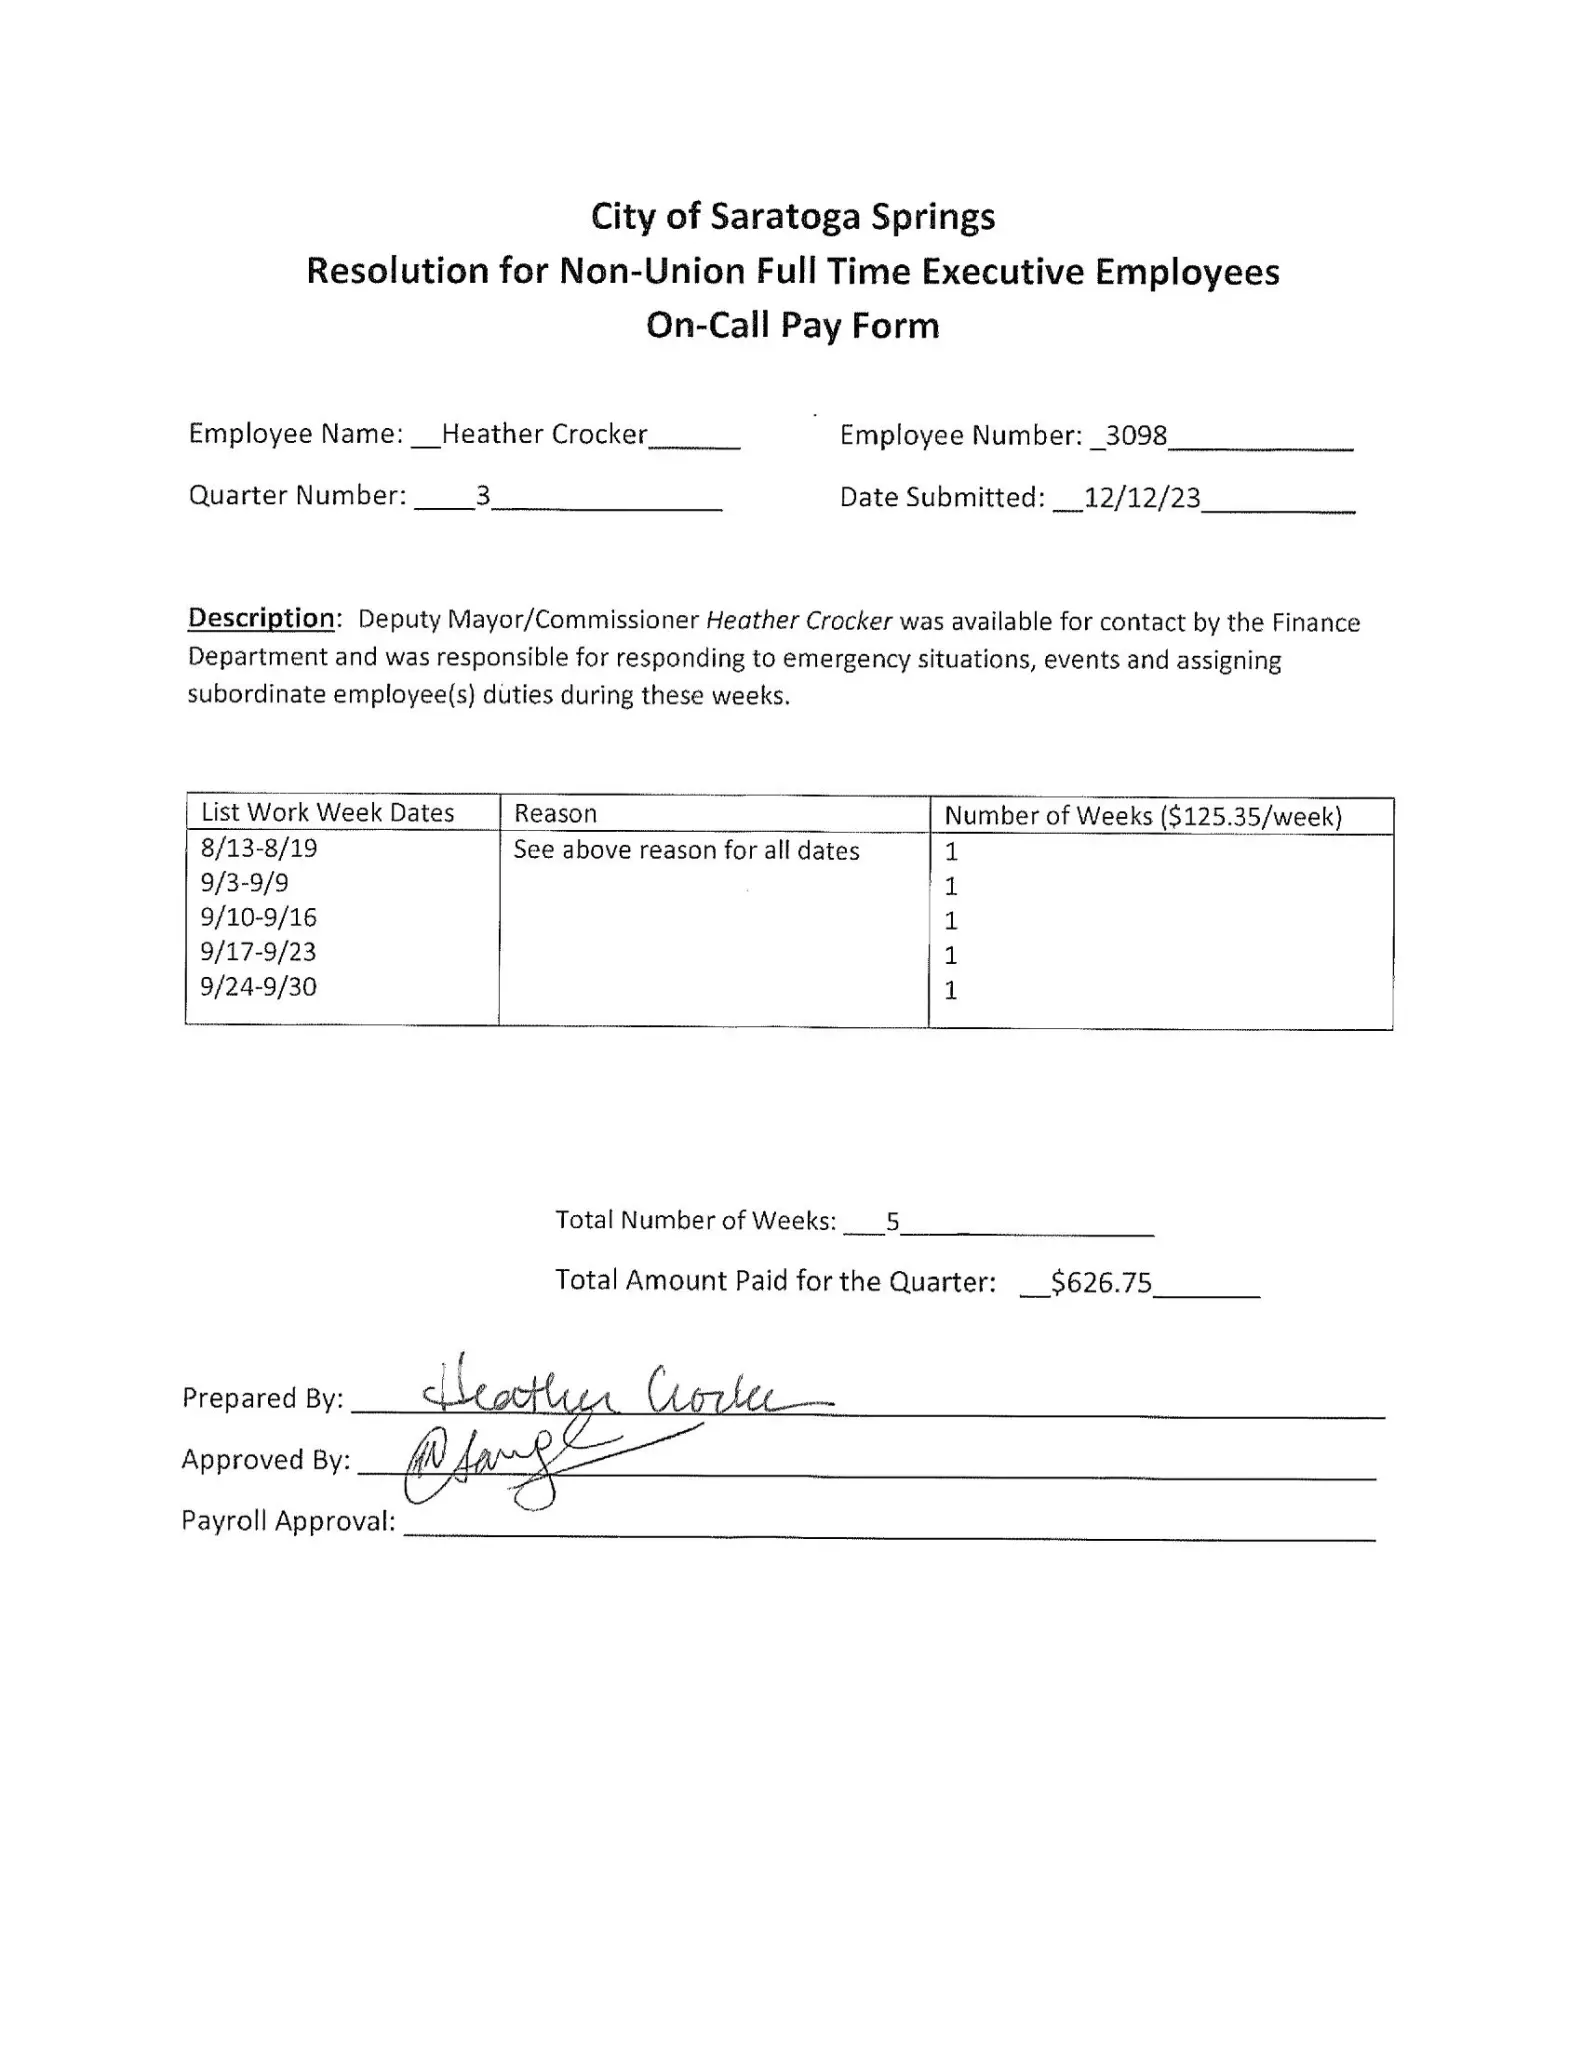 kaufmann-supplemental-foil-reply-on-call-pay_page_2.webp